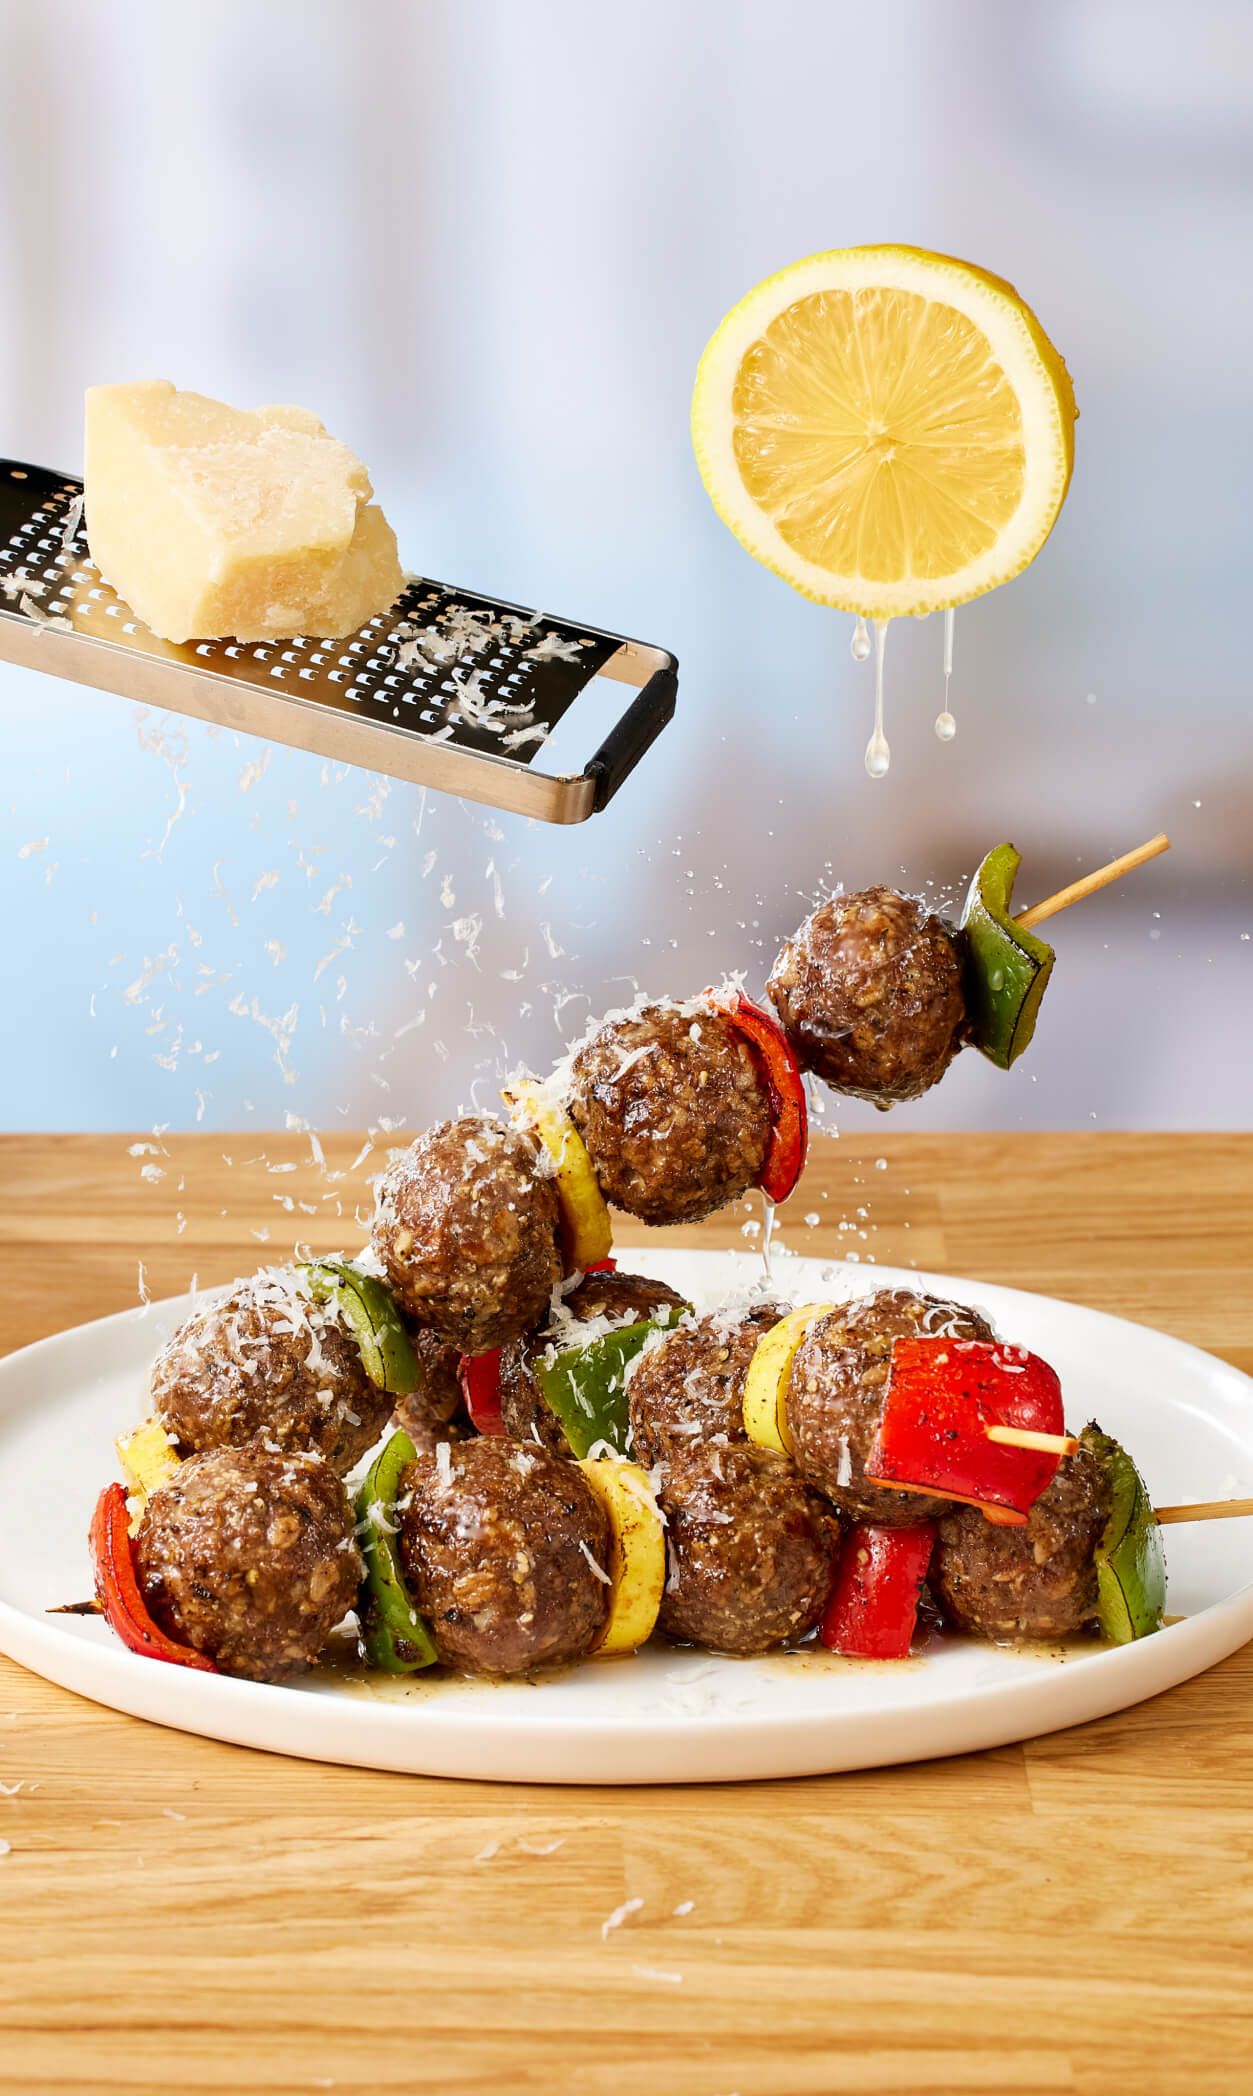 Meatballs and vegetables skewered, with cheese and lemon garnish.